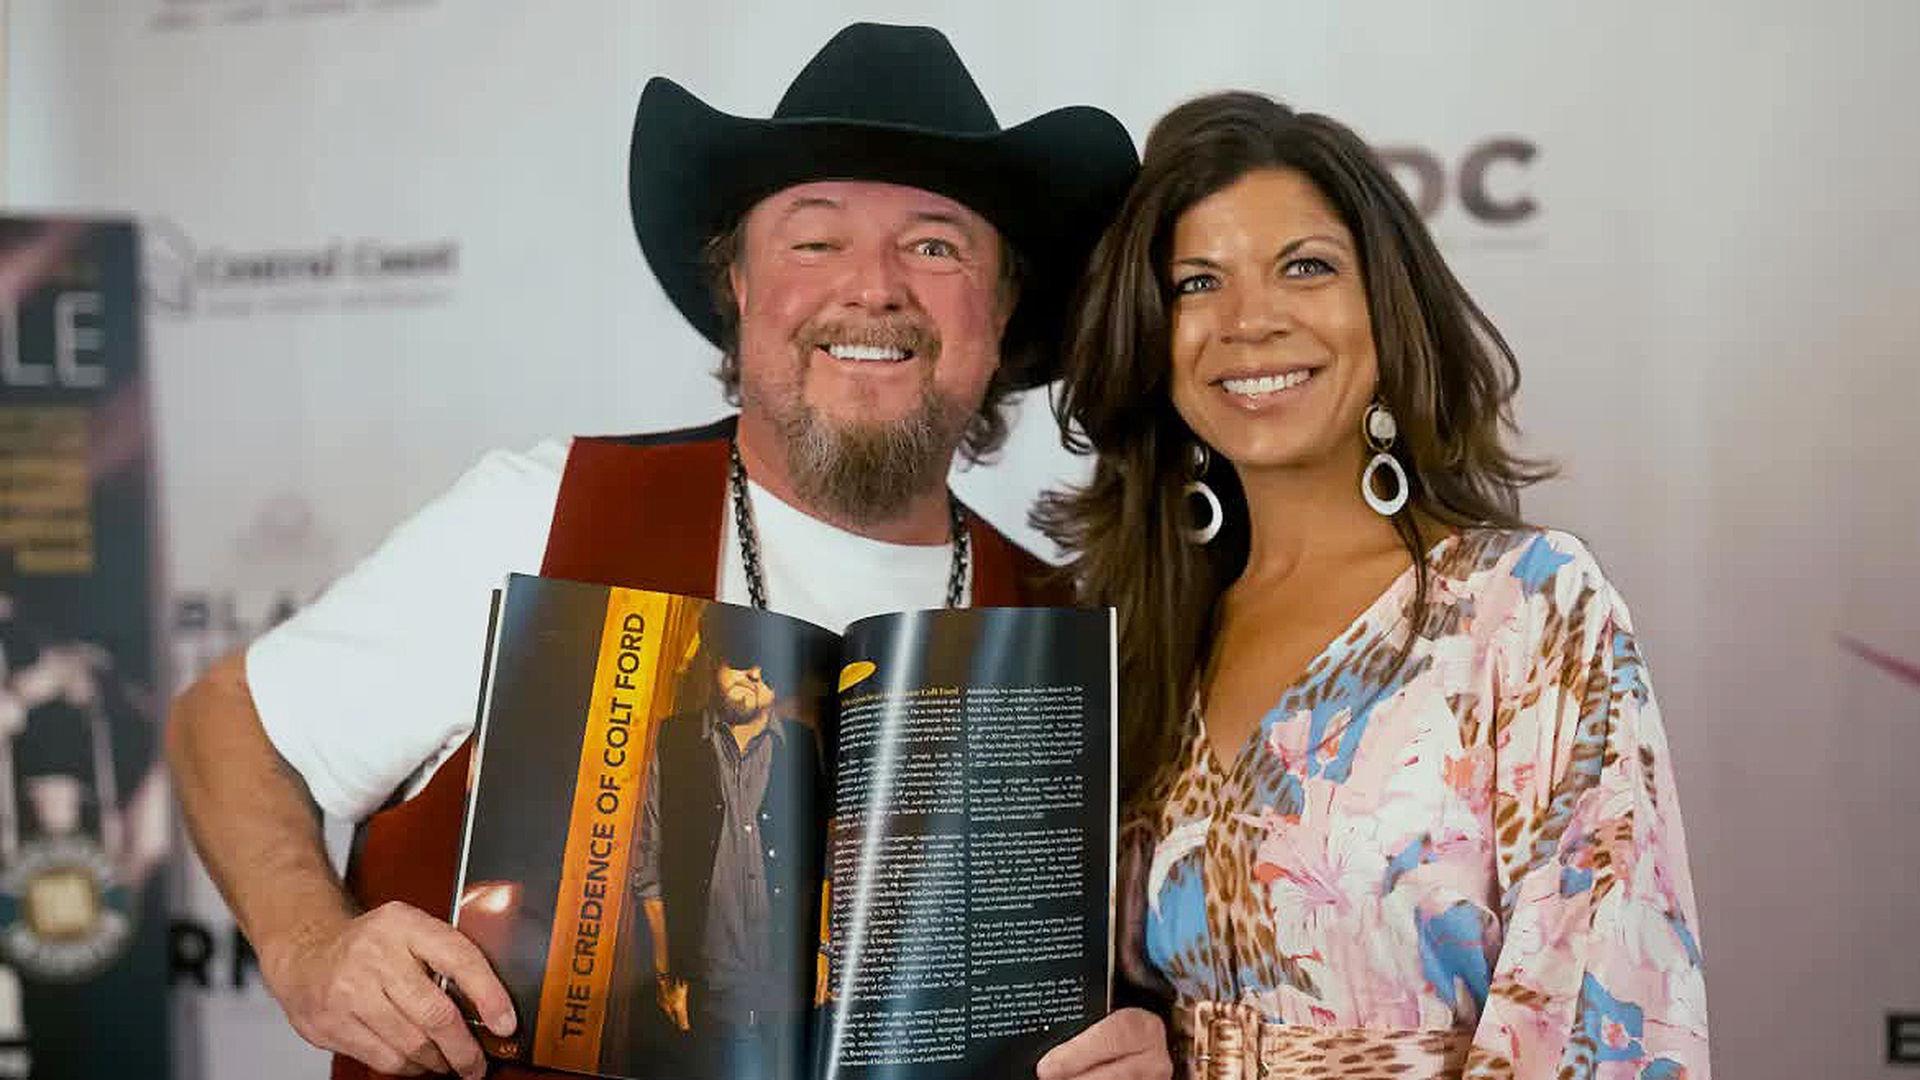 Toby Keith Honored At SabesWings Fundraiser